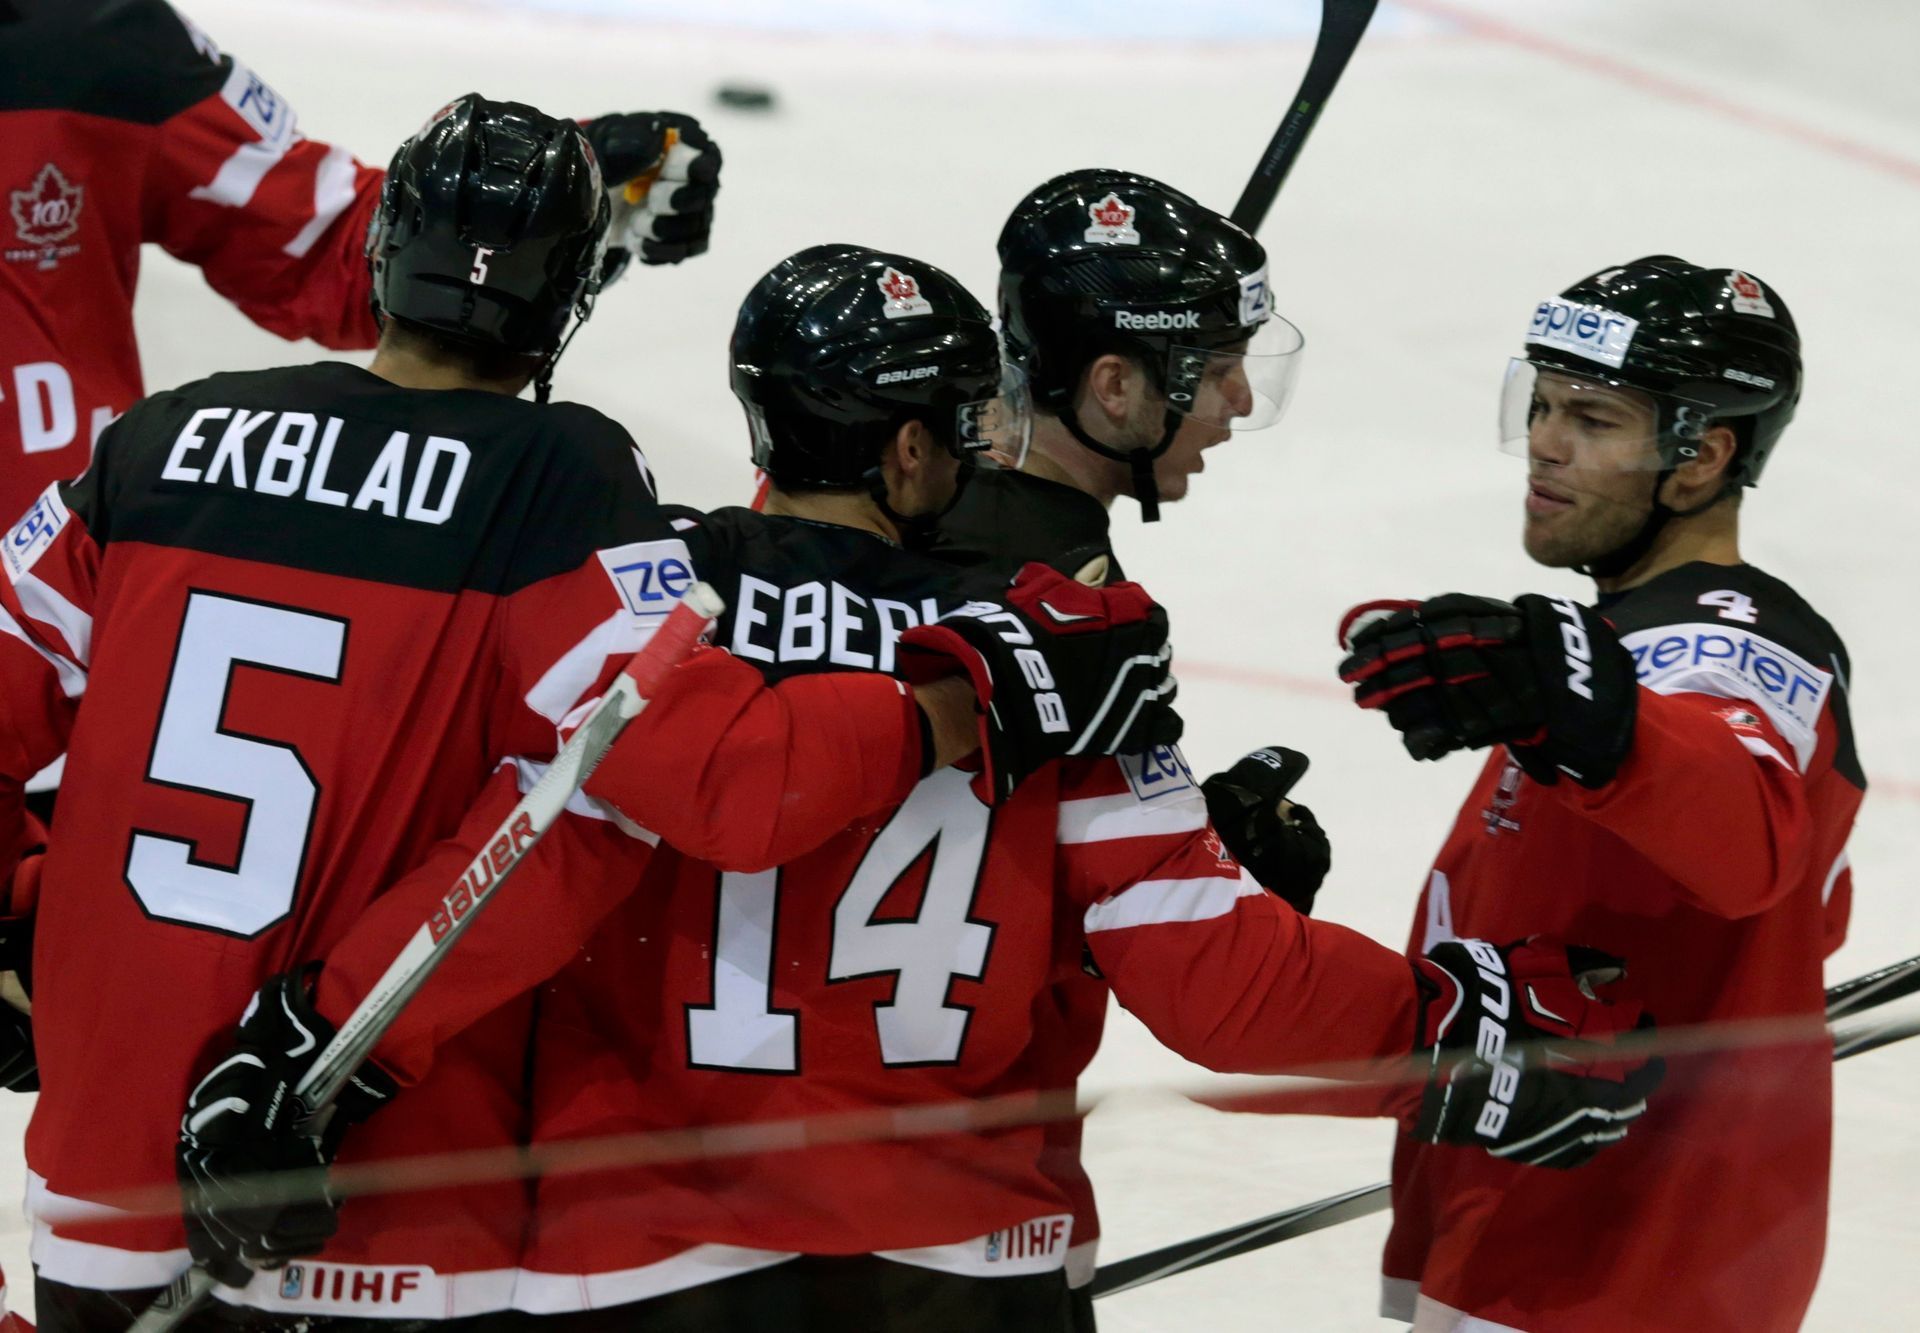 Canada's Eberle celebrates his goal against the Czech Republic with team mates during their Ice Hockey World Championship game against Sweden at the O2 arena in Prague